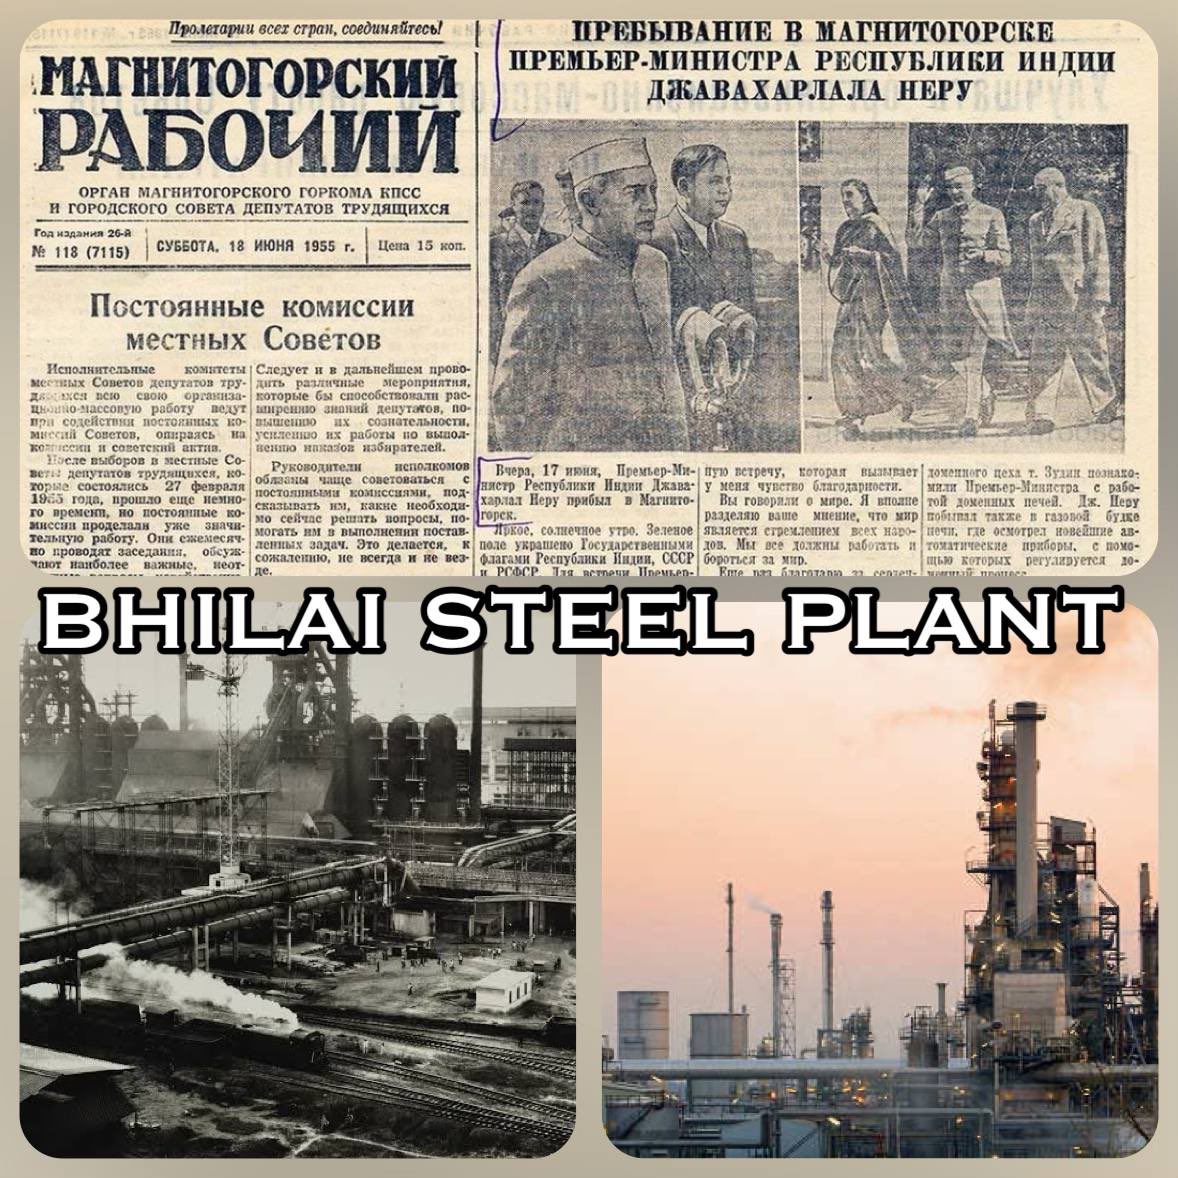 🏭 #OTD in 1955 the #USSR and #India signed an agreement on the construction of the Bhilai Steel Plant @SAILsteel right after 🇮🇳 PM Jawaharlal Nehru had visited Magnitogorsk, the capital of 🇷🇺 iron and #steel works.